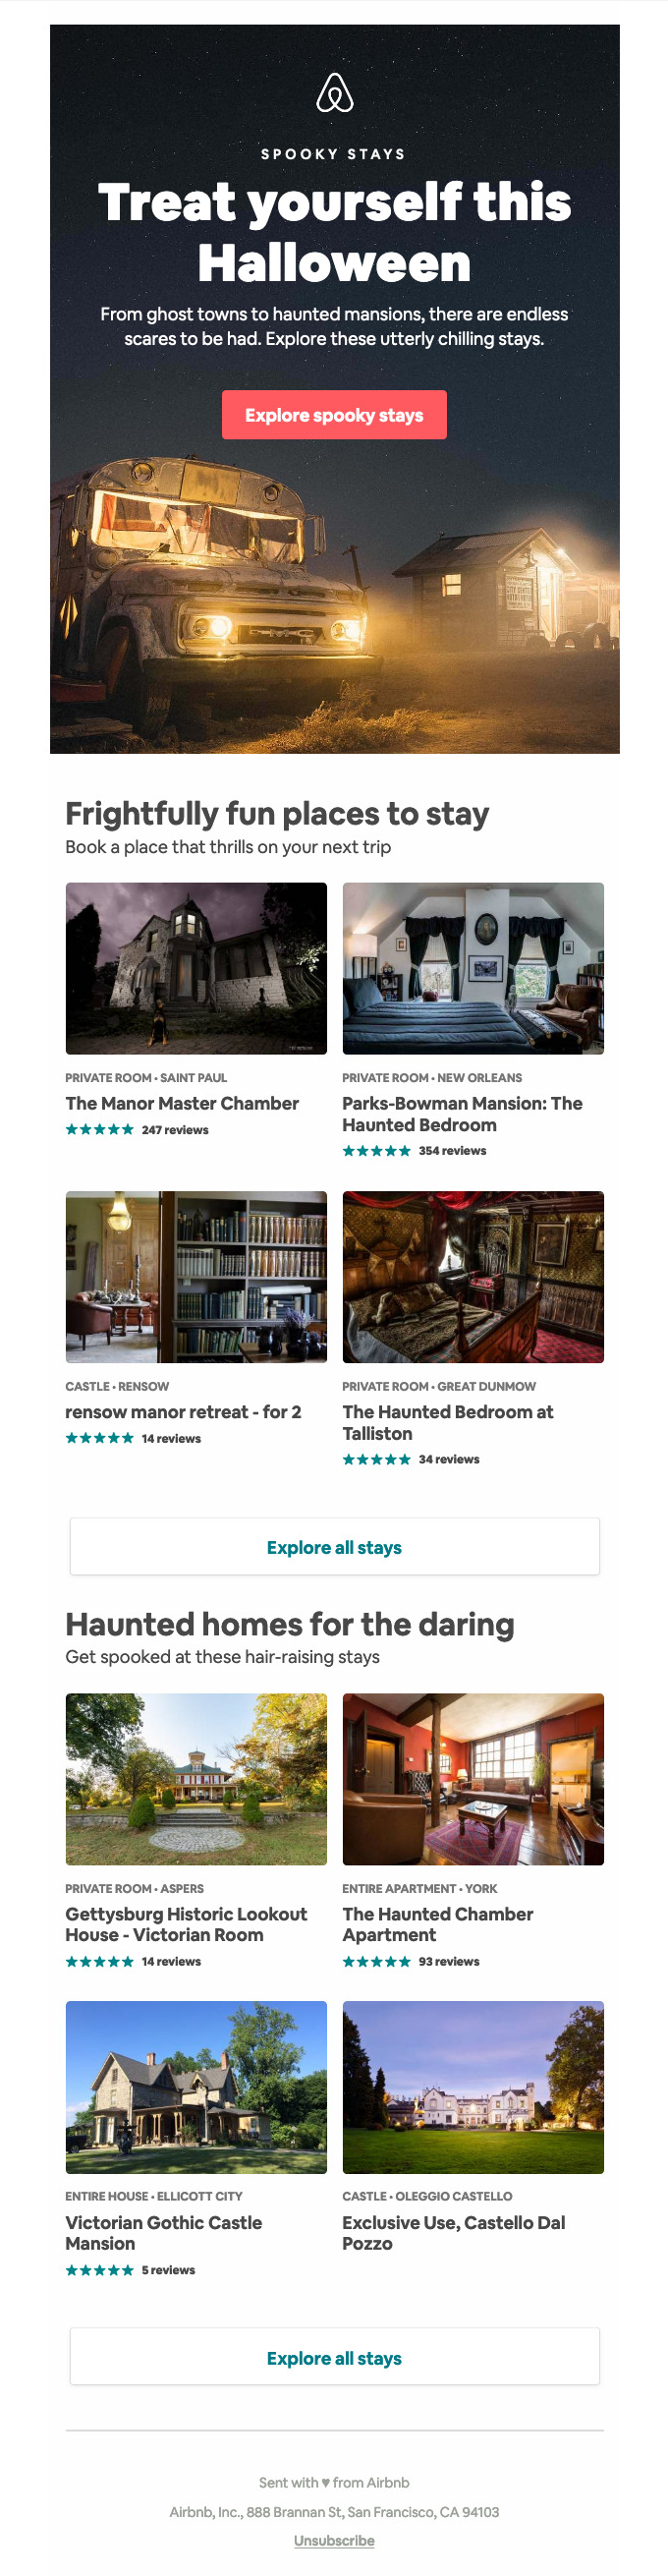 Halloween themed properties from Airbnb.